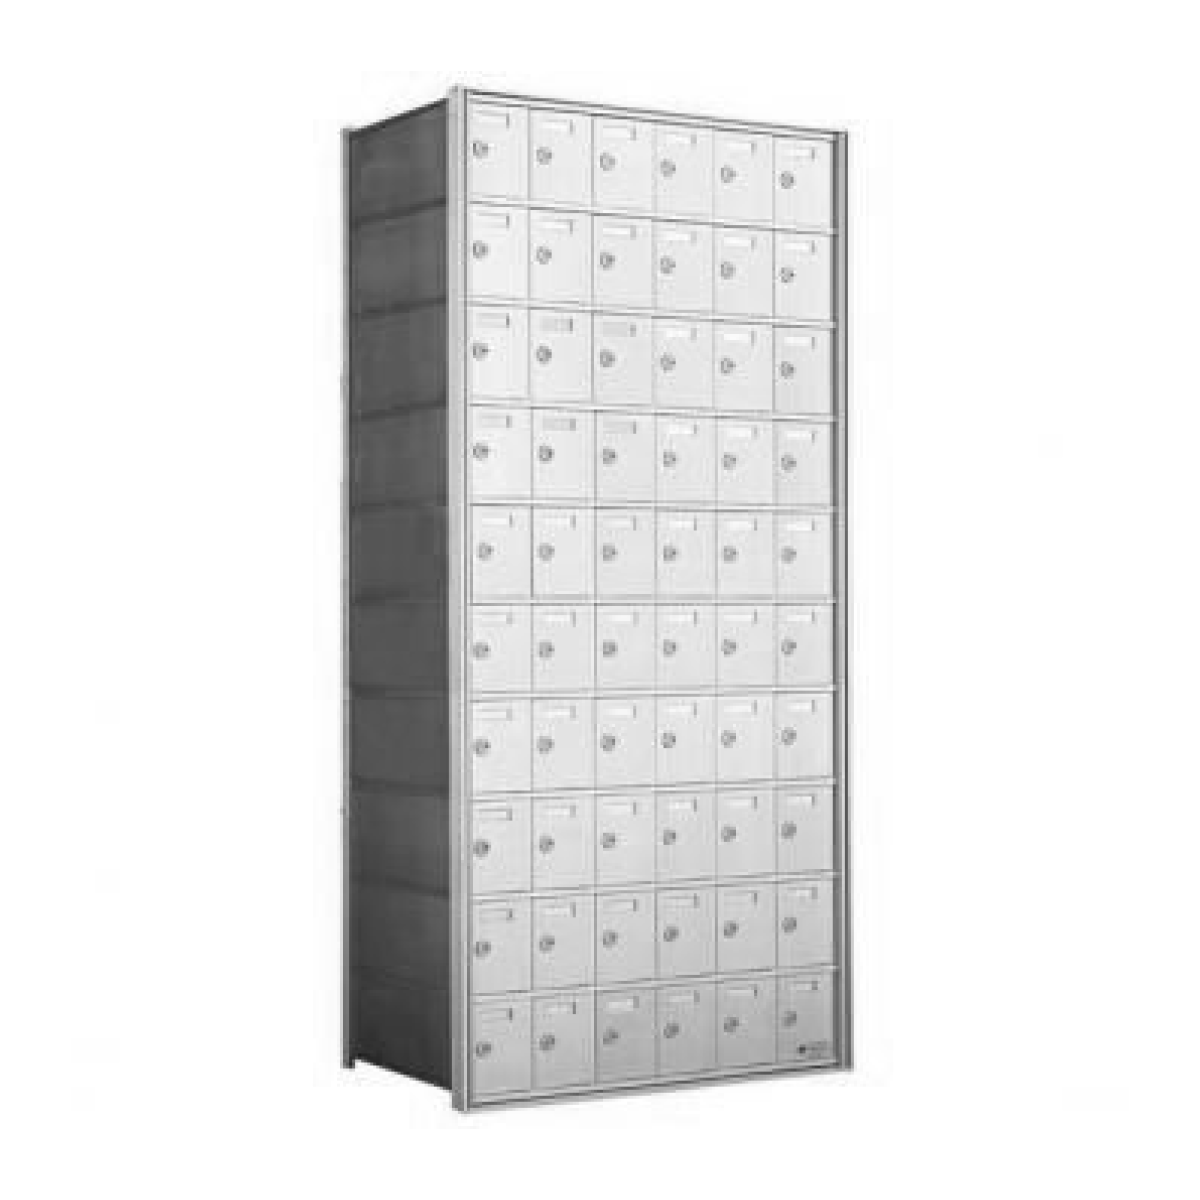 10 Doors High x 6 Doors (60 Tenants) 1700 Series Rear-Load Private Distribution Horizontal Mailbox in Anodized Aluminum Finish Product Image